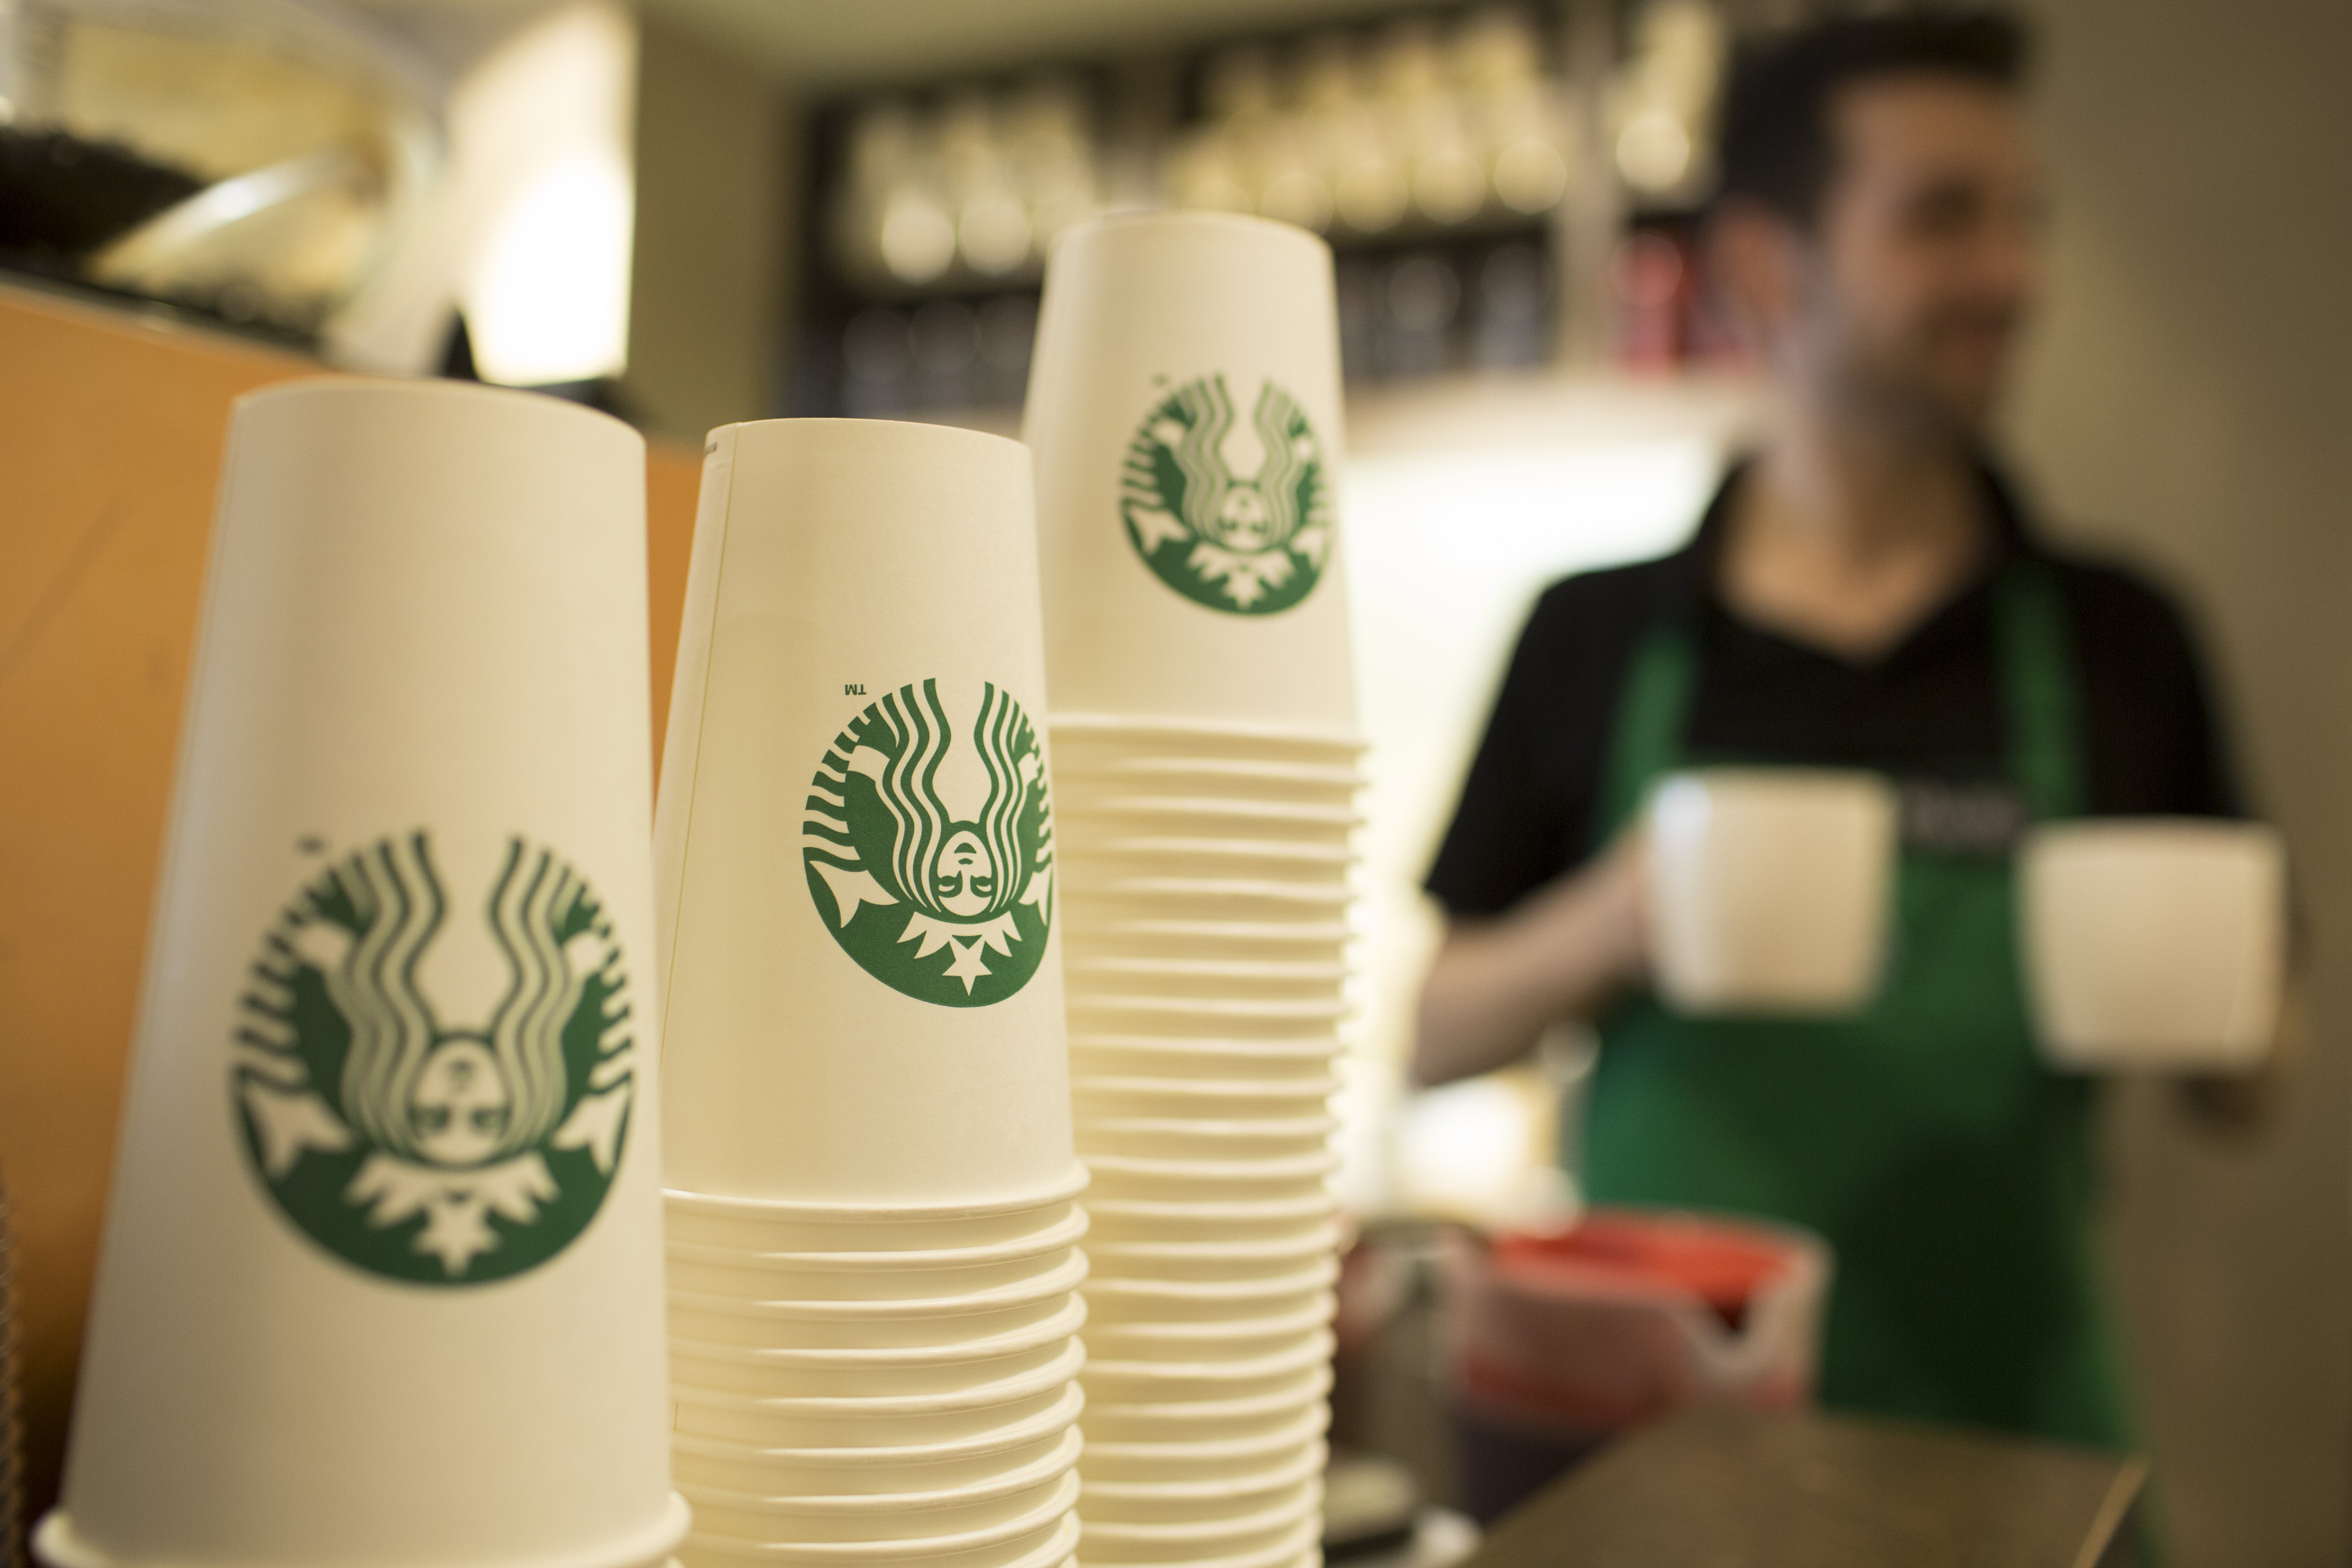 The Starbucks Corp. logo sits on cardboard coffee cups inside a Starbucks Corp. shop in London, U.K., on Monday, June 9, 2014. (Bloomberg via Getty Images)